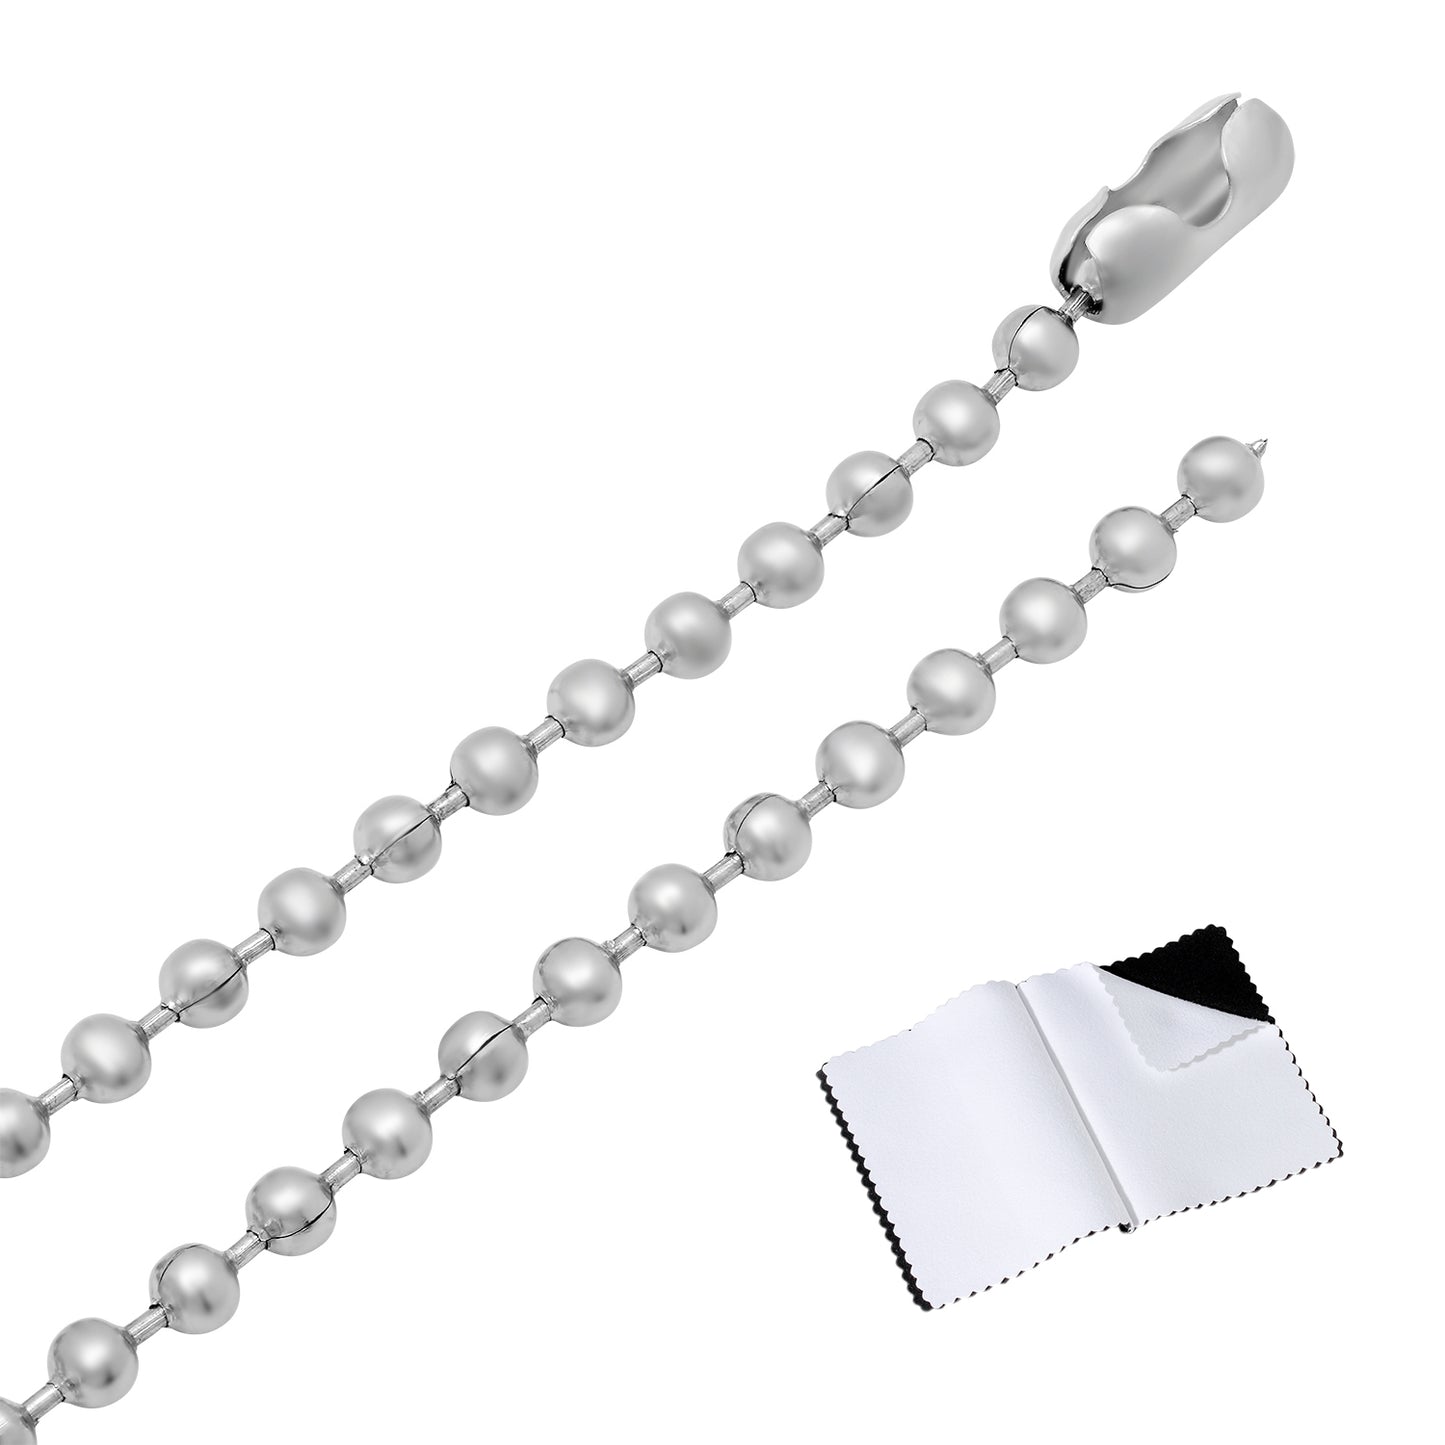 4mm High-Polished Stainless Steel Ball Military Necklace (SKU: ST-BAL400)